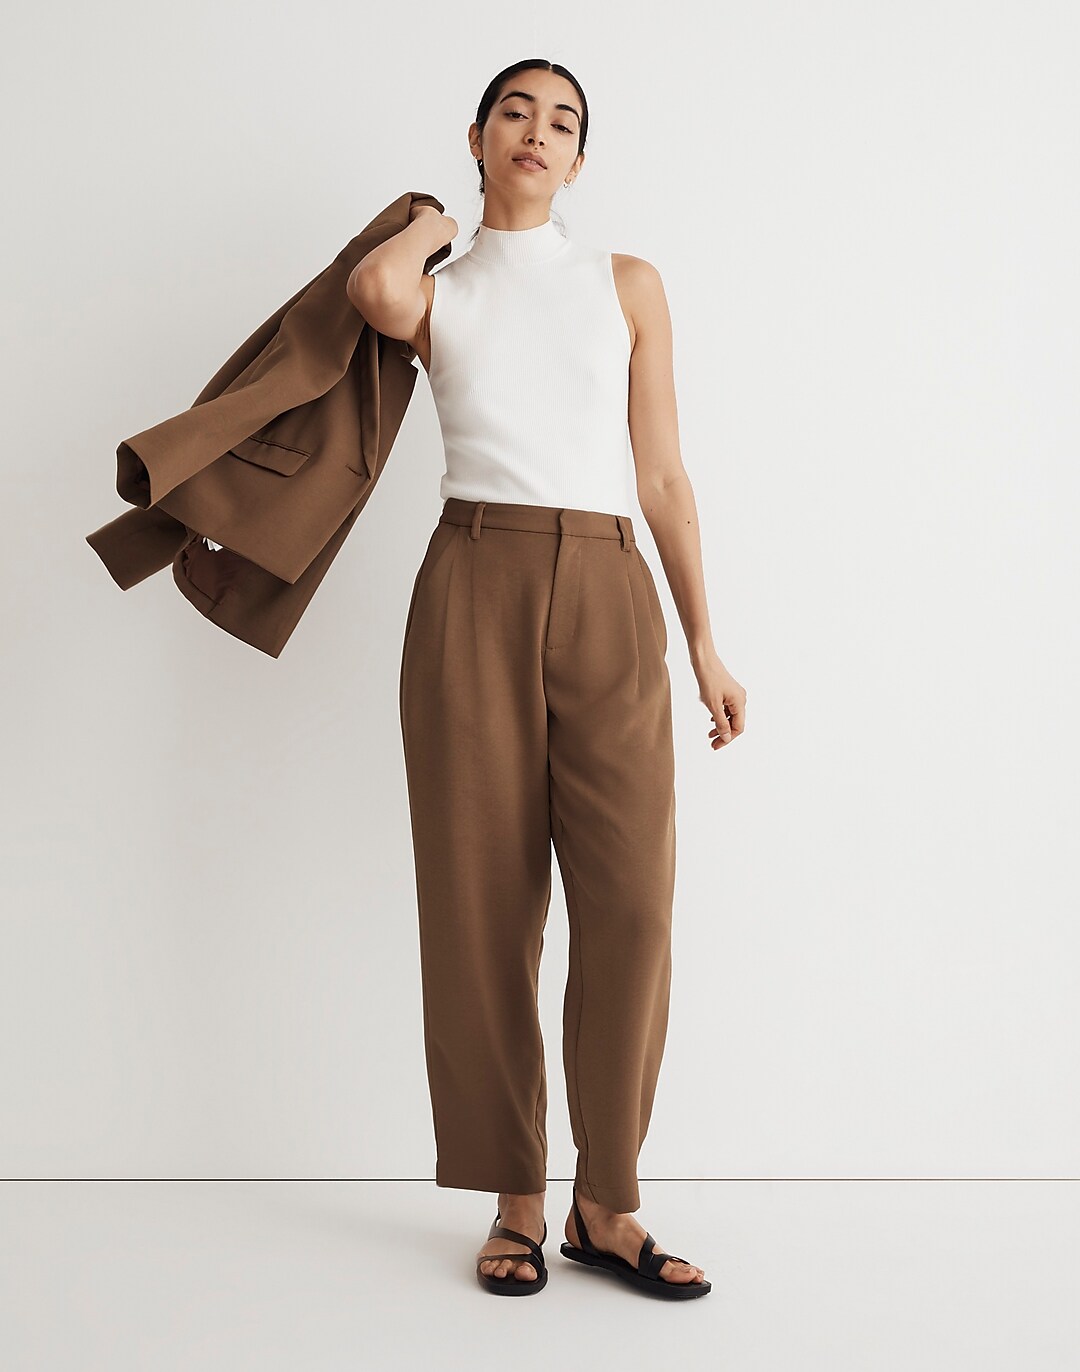 Pleated Tapered-Leg Pants in Easygoing Crepe